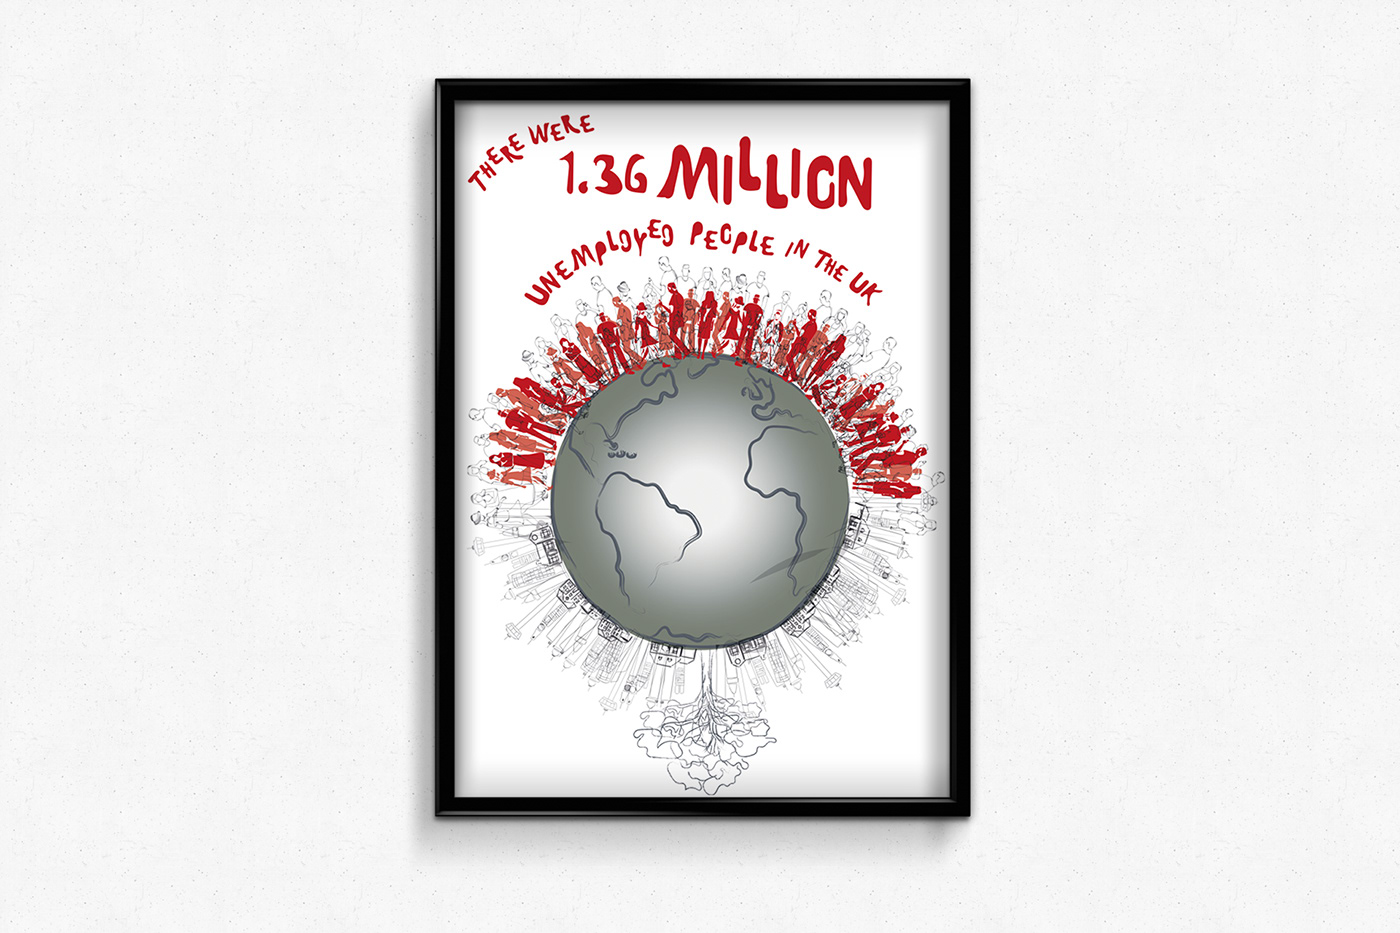 Posters highlighting the causes and effects of overpopulation.
(Focused on the UK around 2018) 